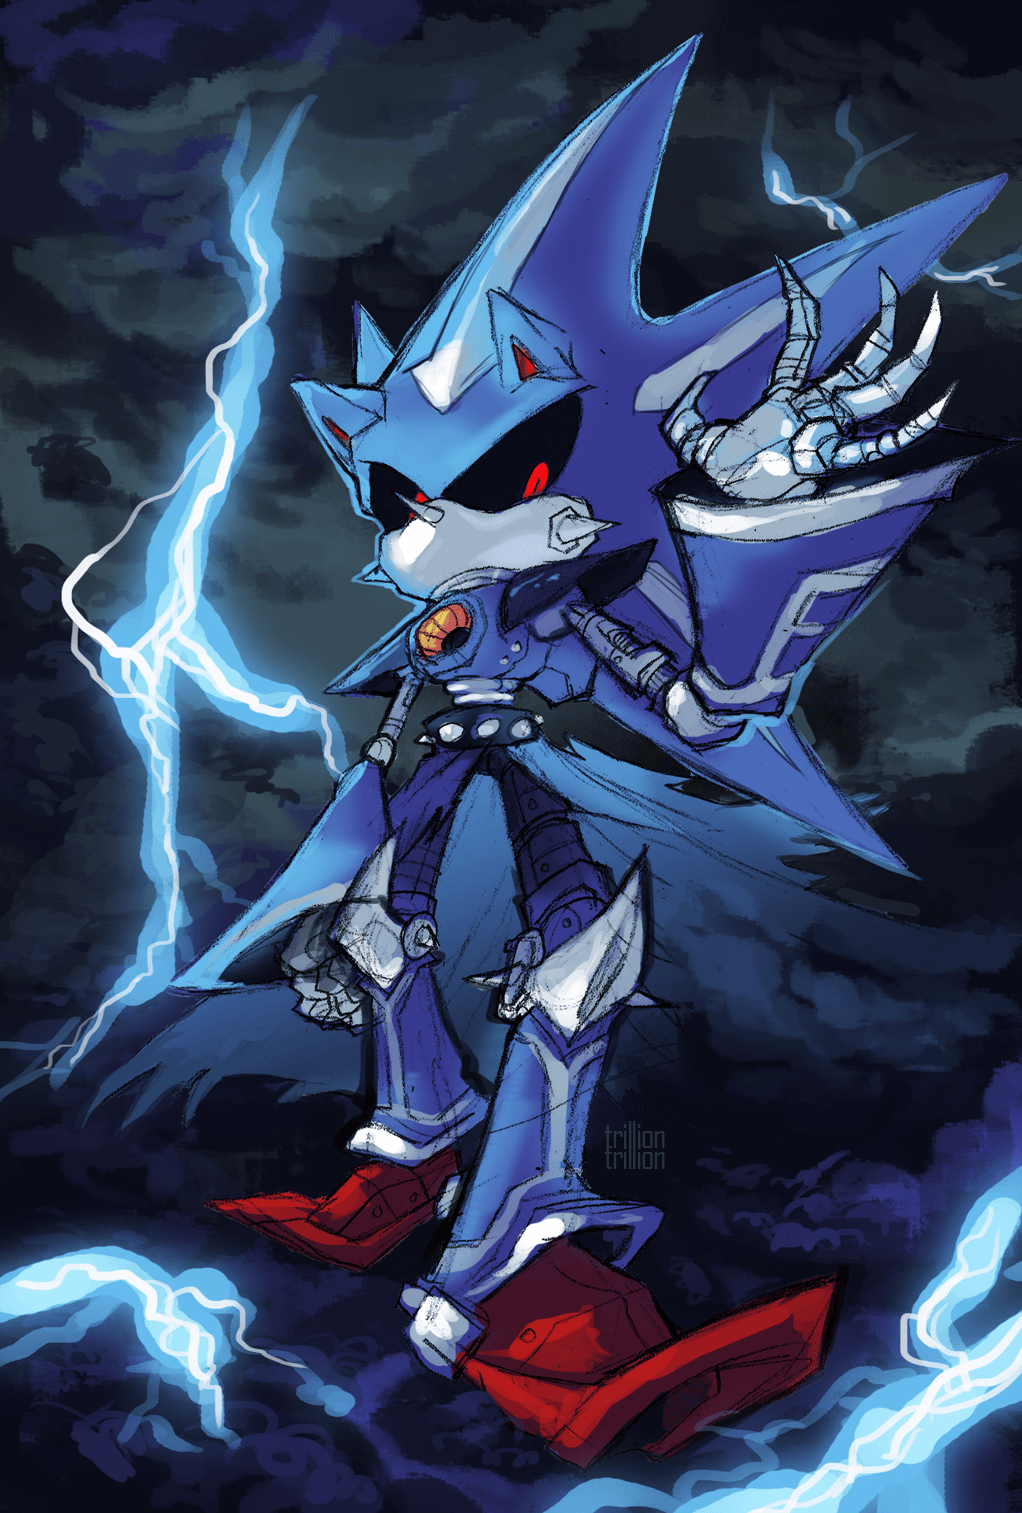 Neo Metal Sonic. by C405 on Newgrounds